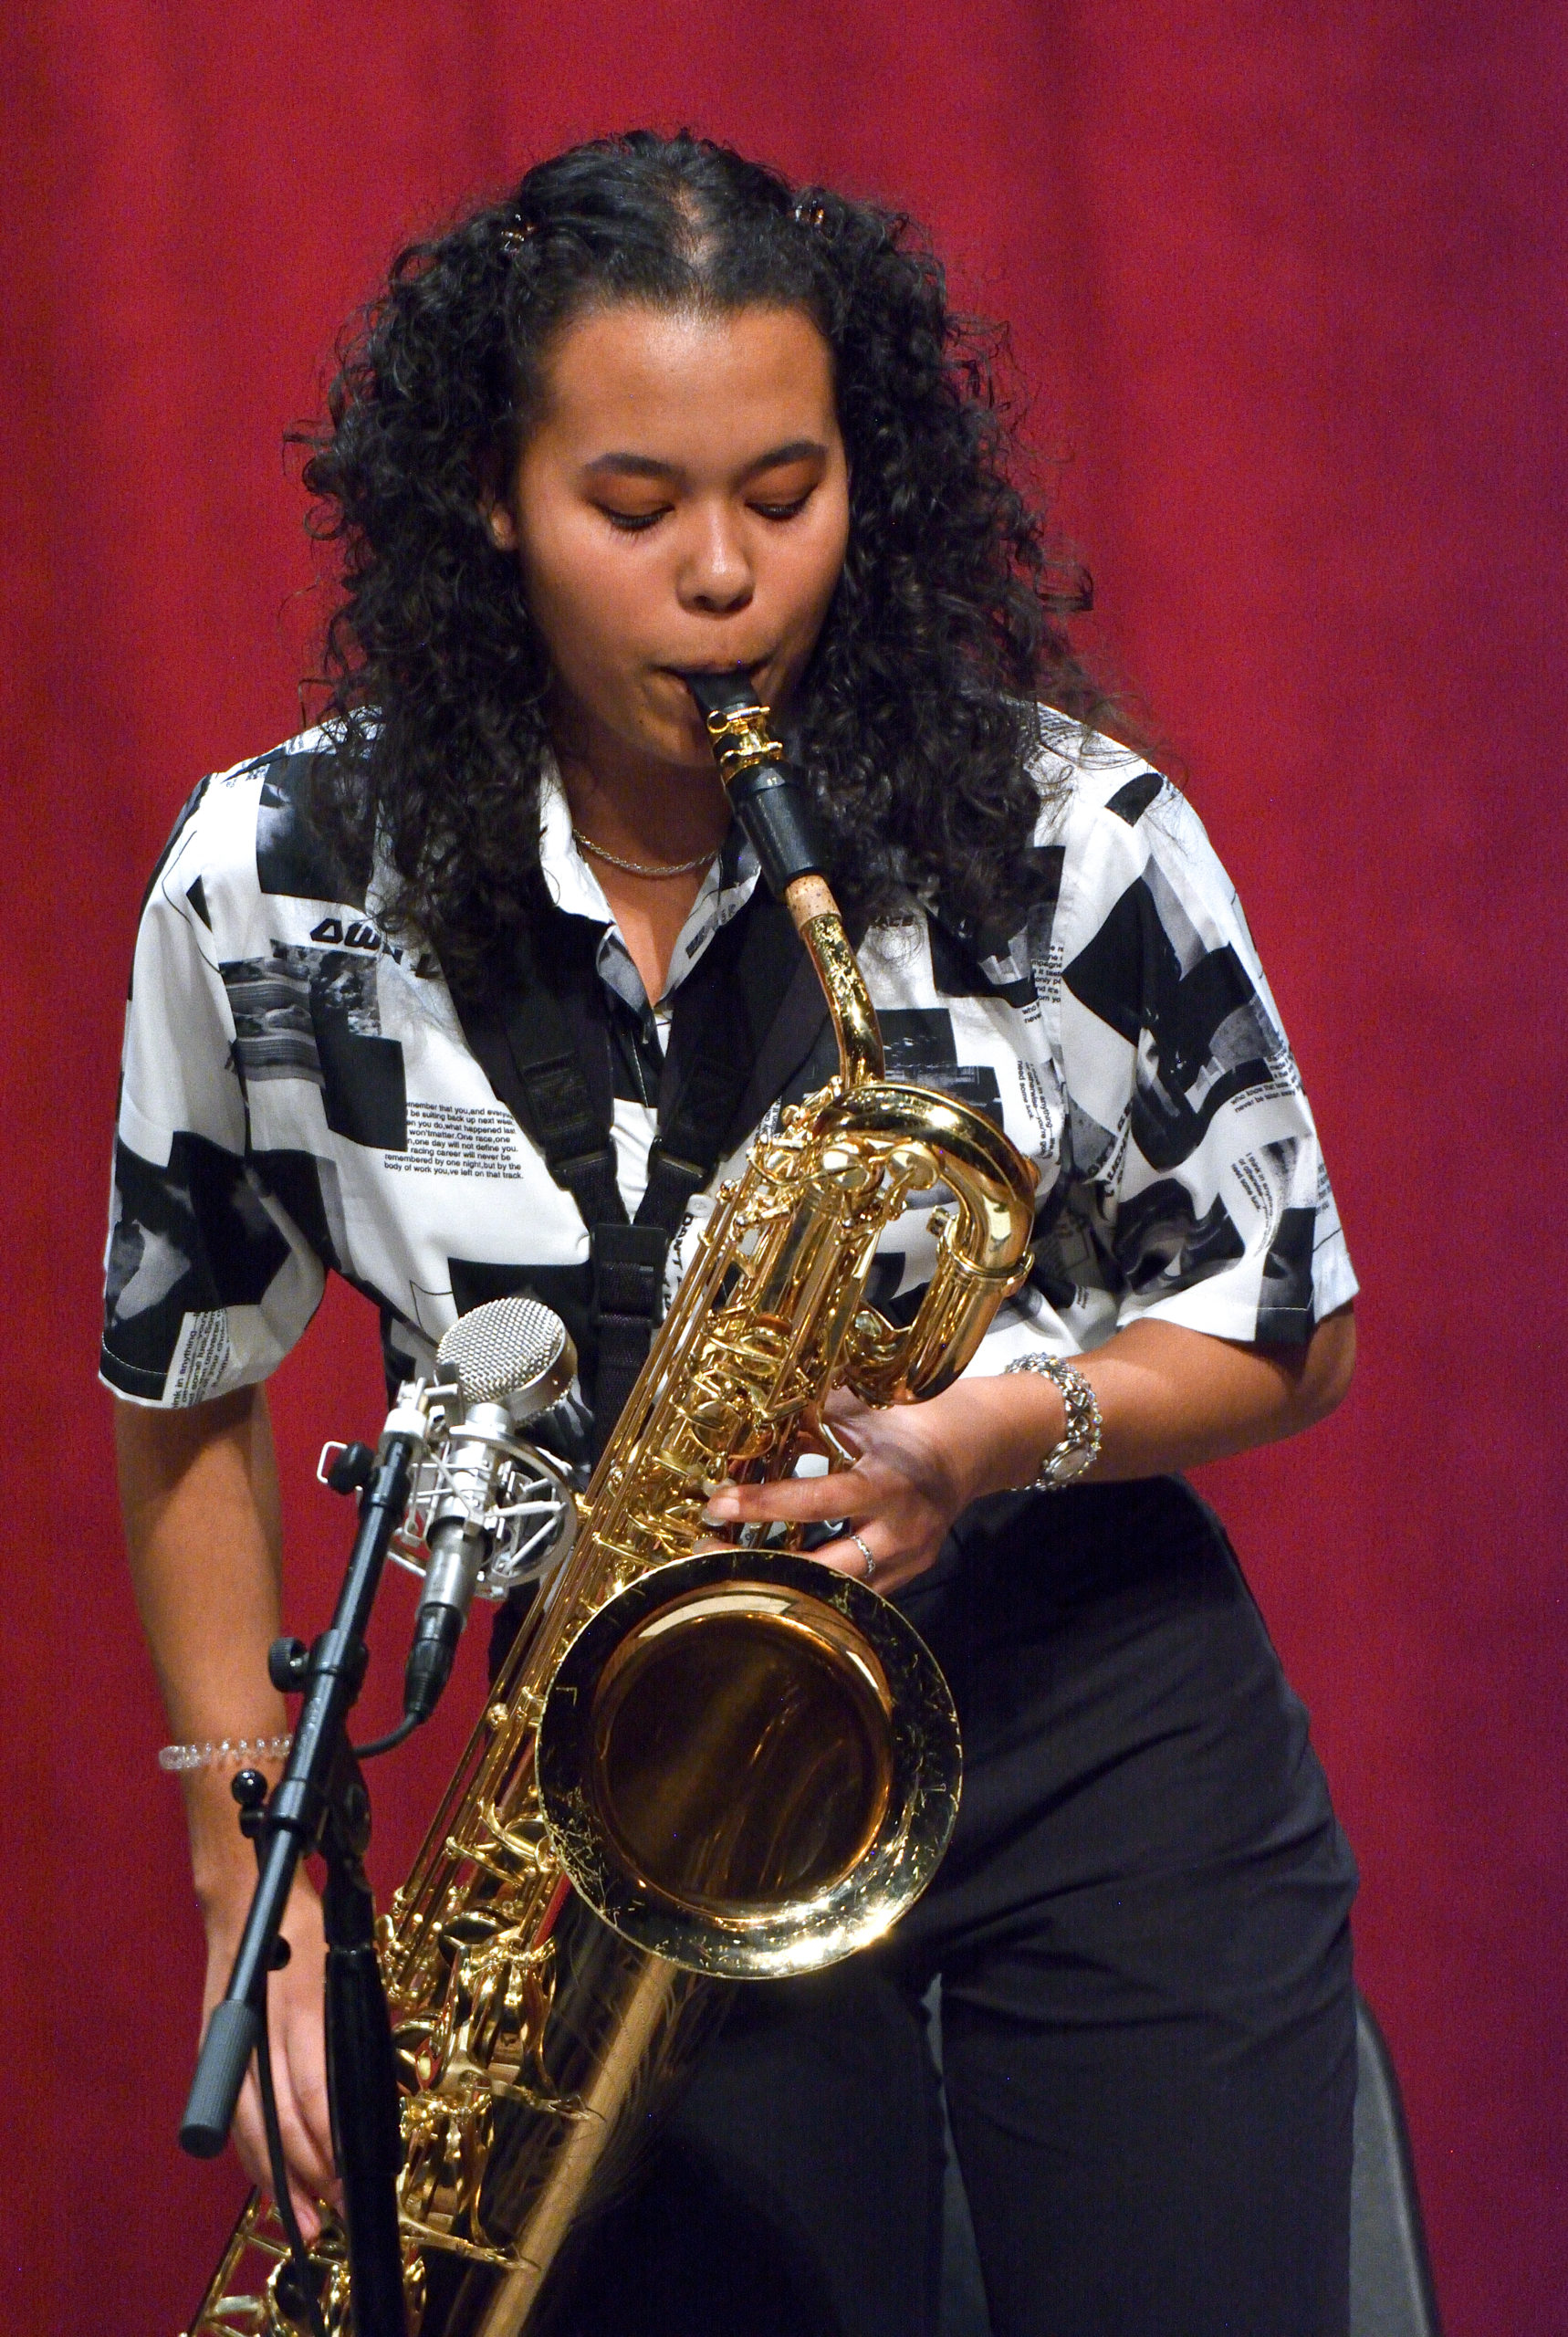 Woman with curly black hair and black and white shirt plays alto saxaphone